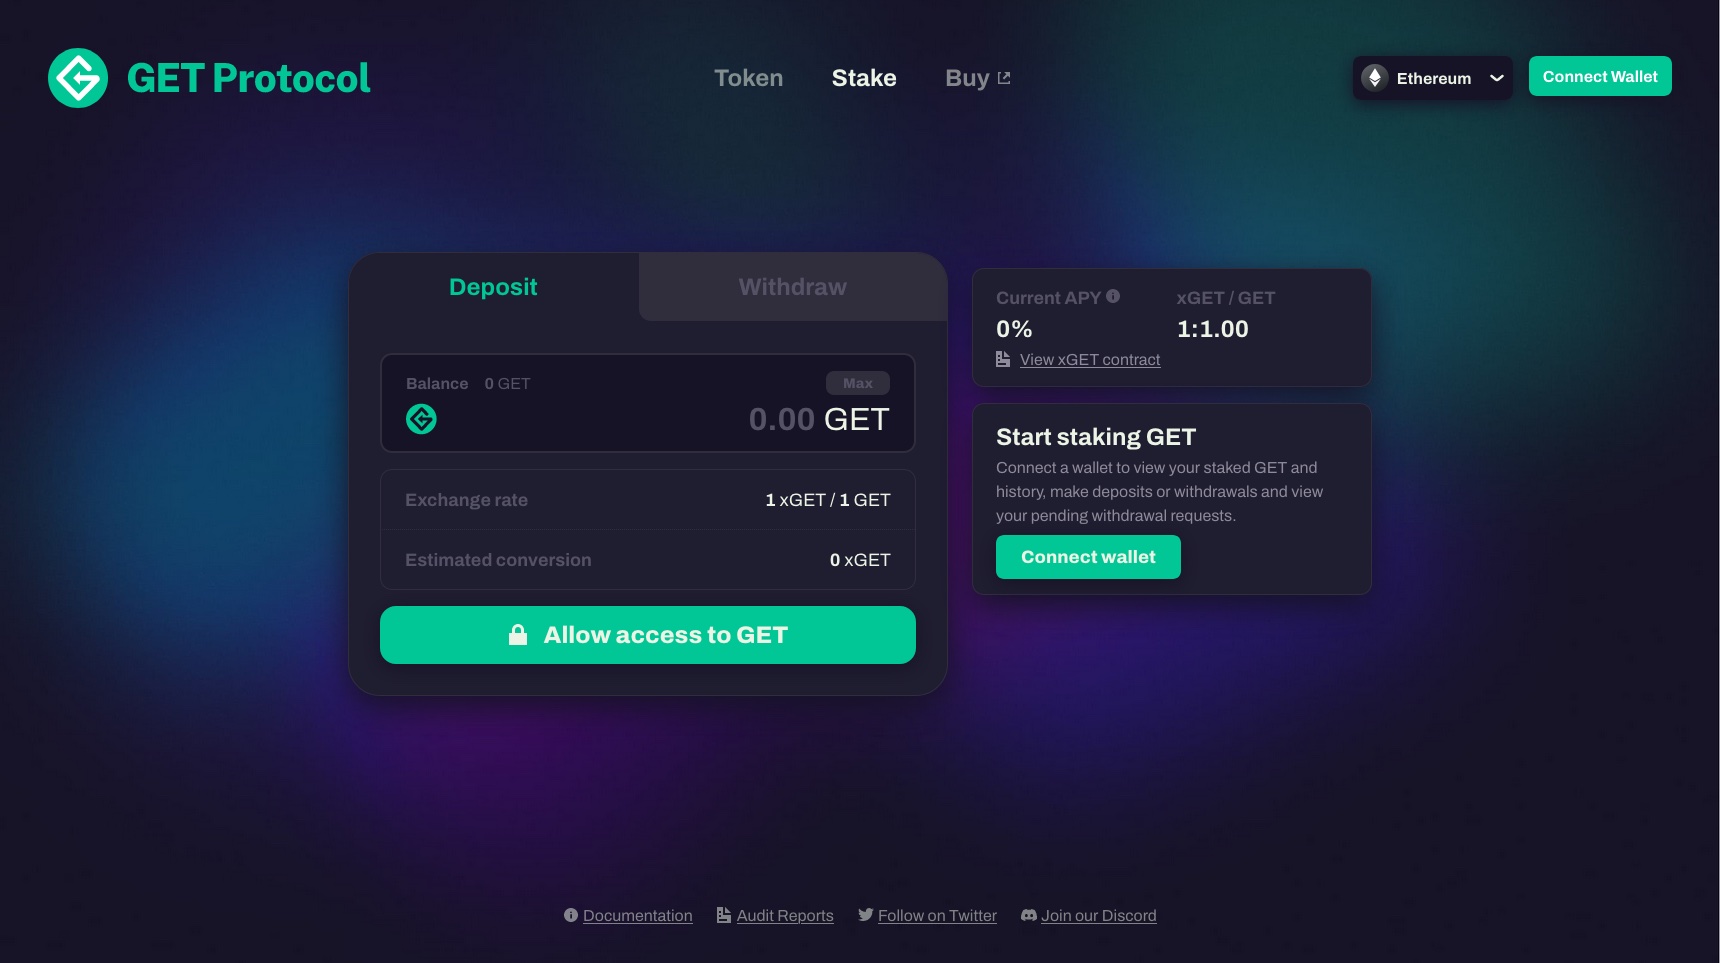 Stake your GET using the Deposit function of the token dashboard.